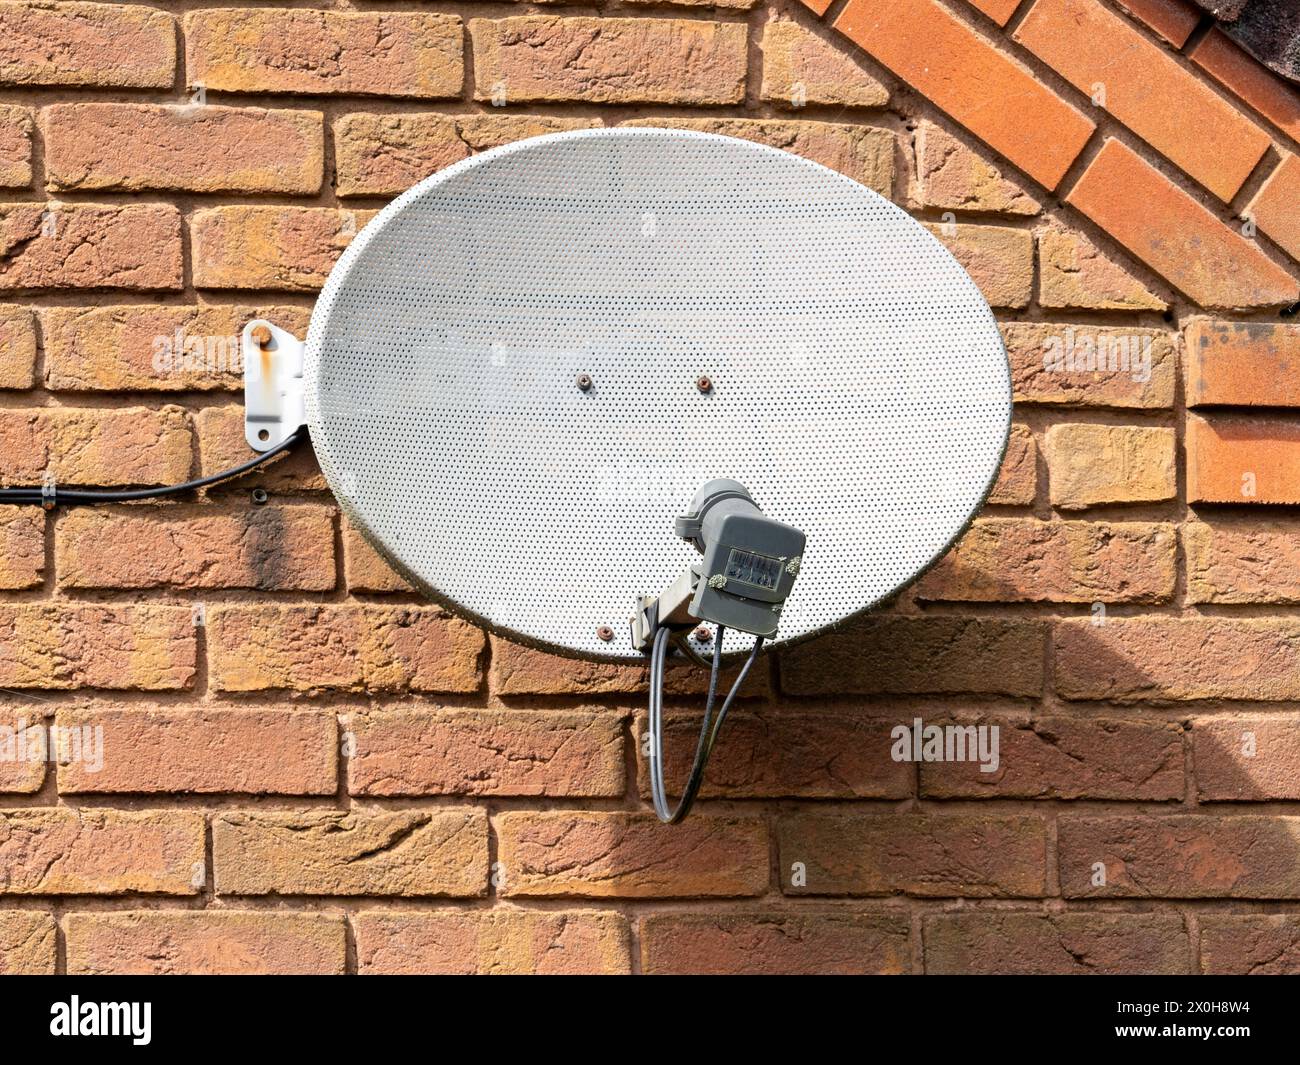 old weathered Digital satelite television receiver  dish multi channel decoder fixed to a brick wall Stock Photo